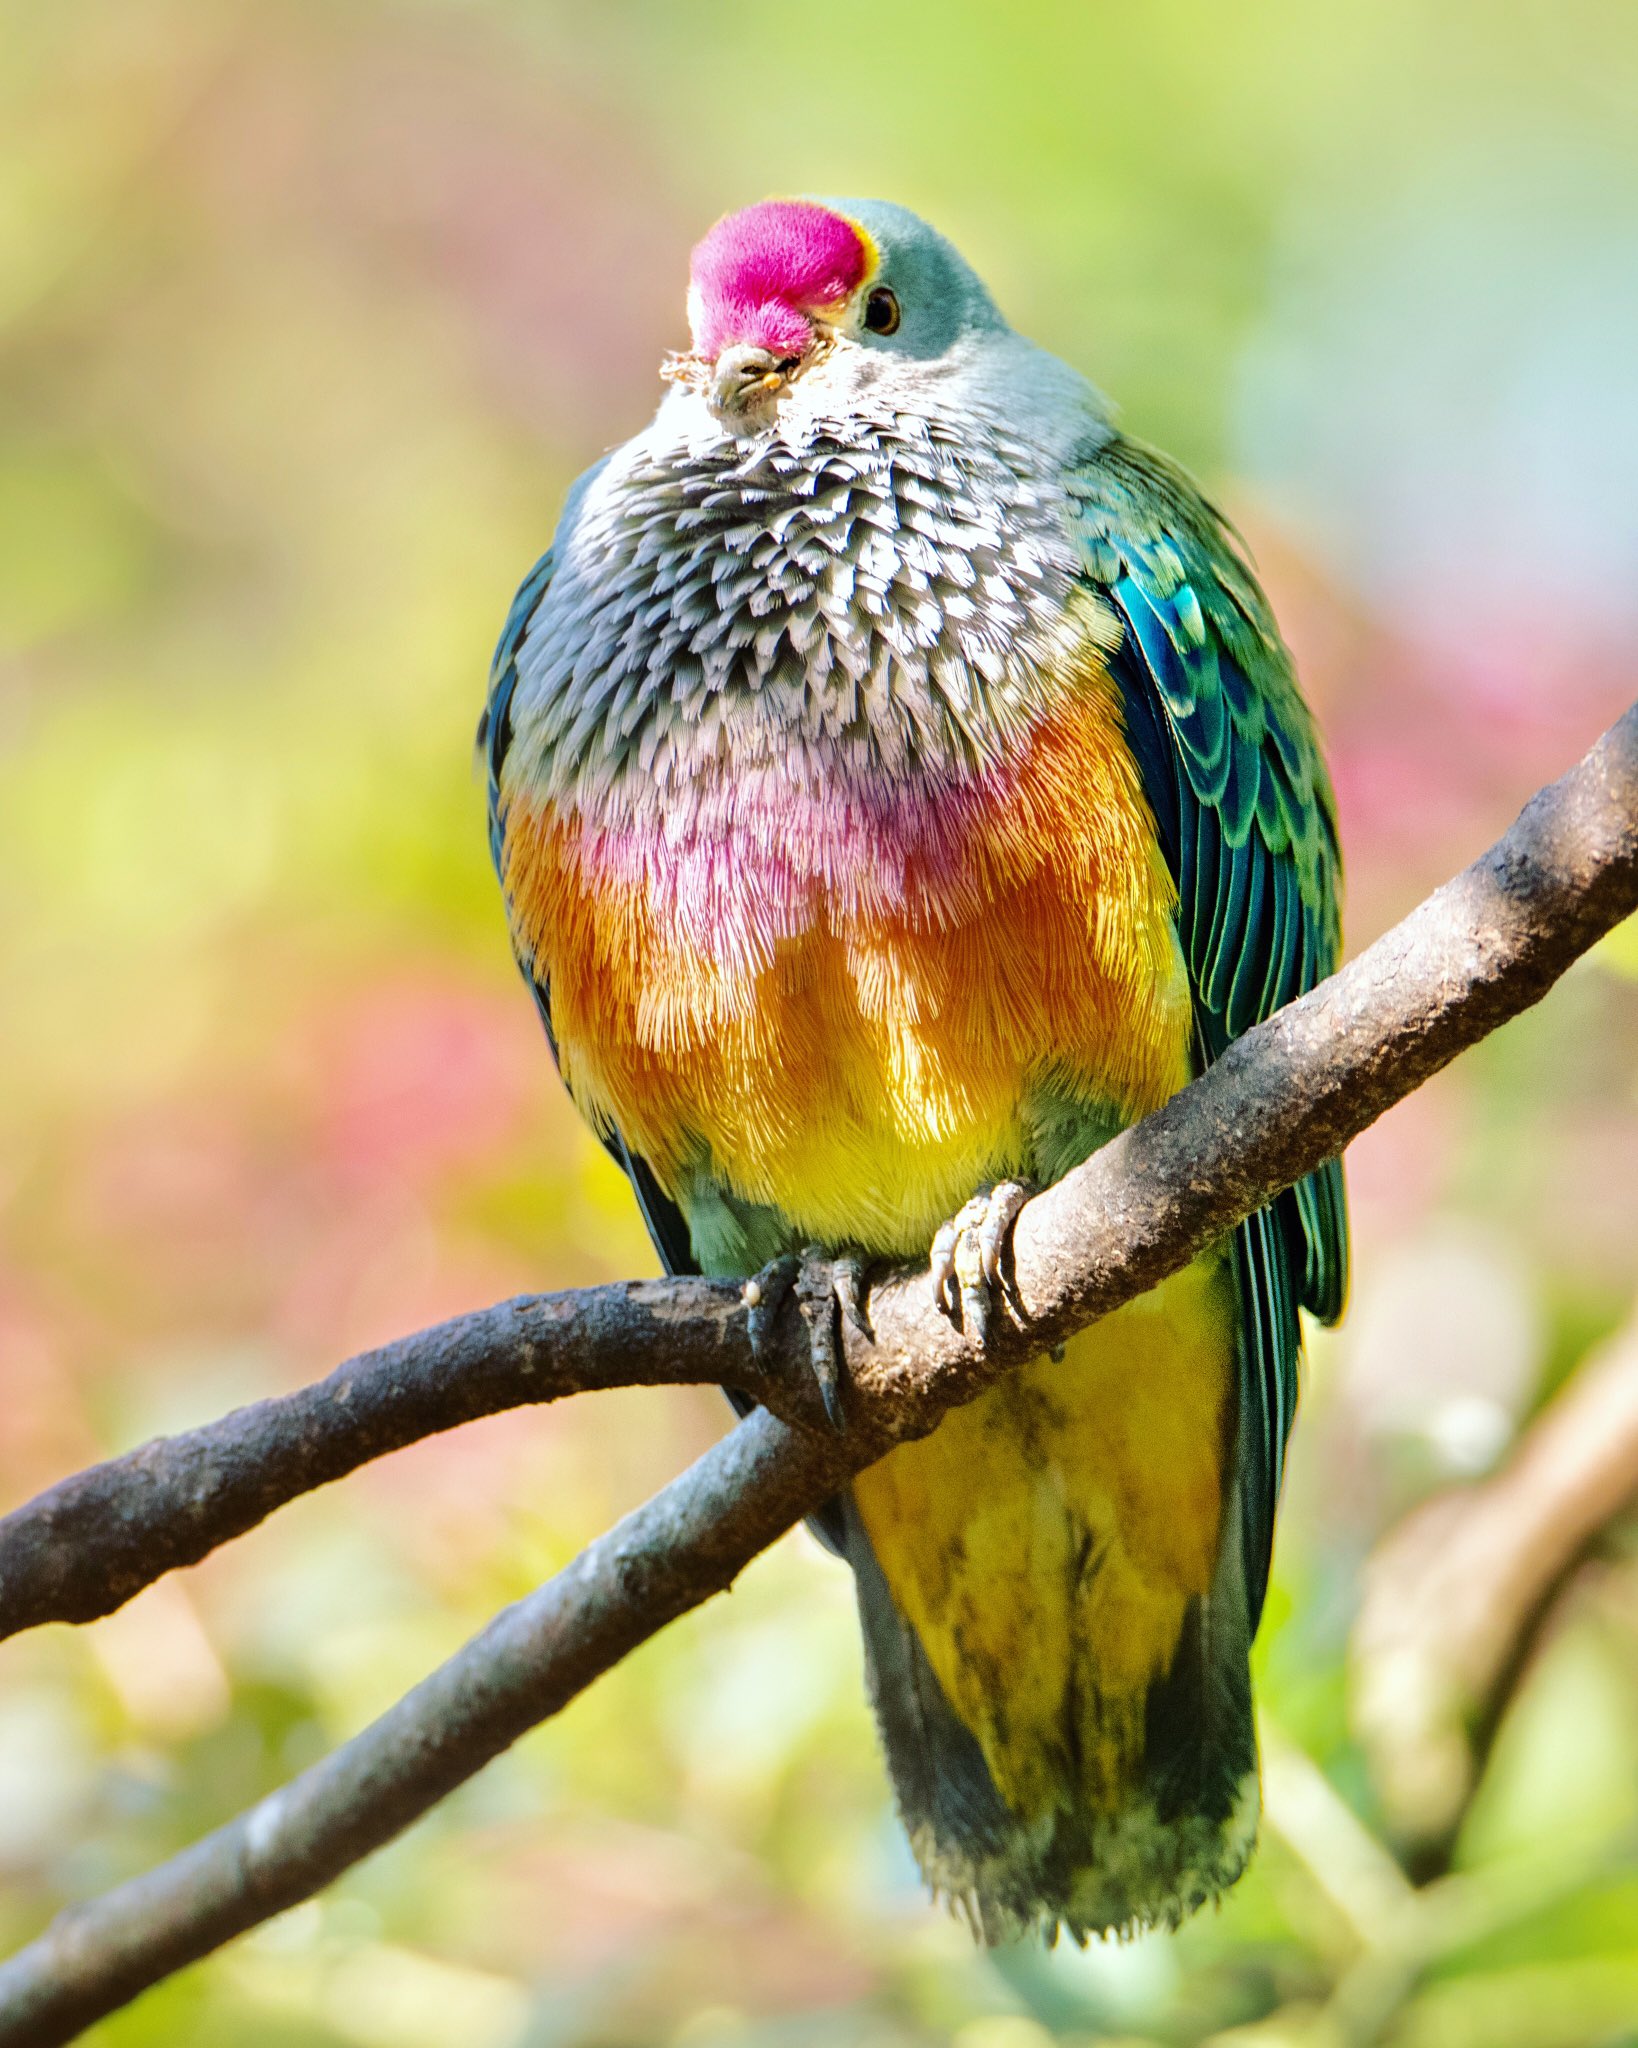 Australia Zoo on X: "Our beautiful rose-crowned fruit doves celebrate  everyday like it's Christmas with their festive feathers. We hope you feel  like royalty this holiday season, celebrating with everyone you love!